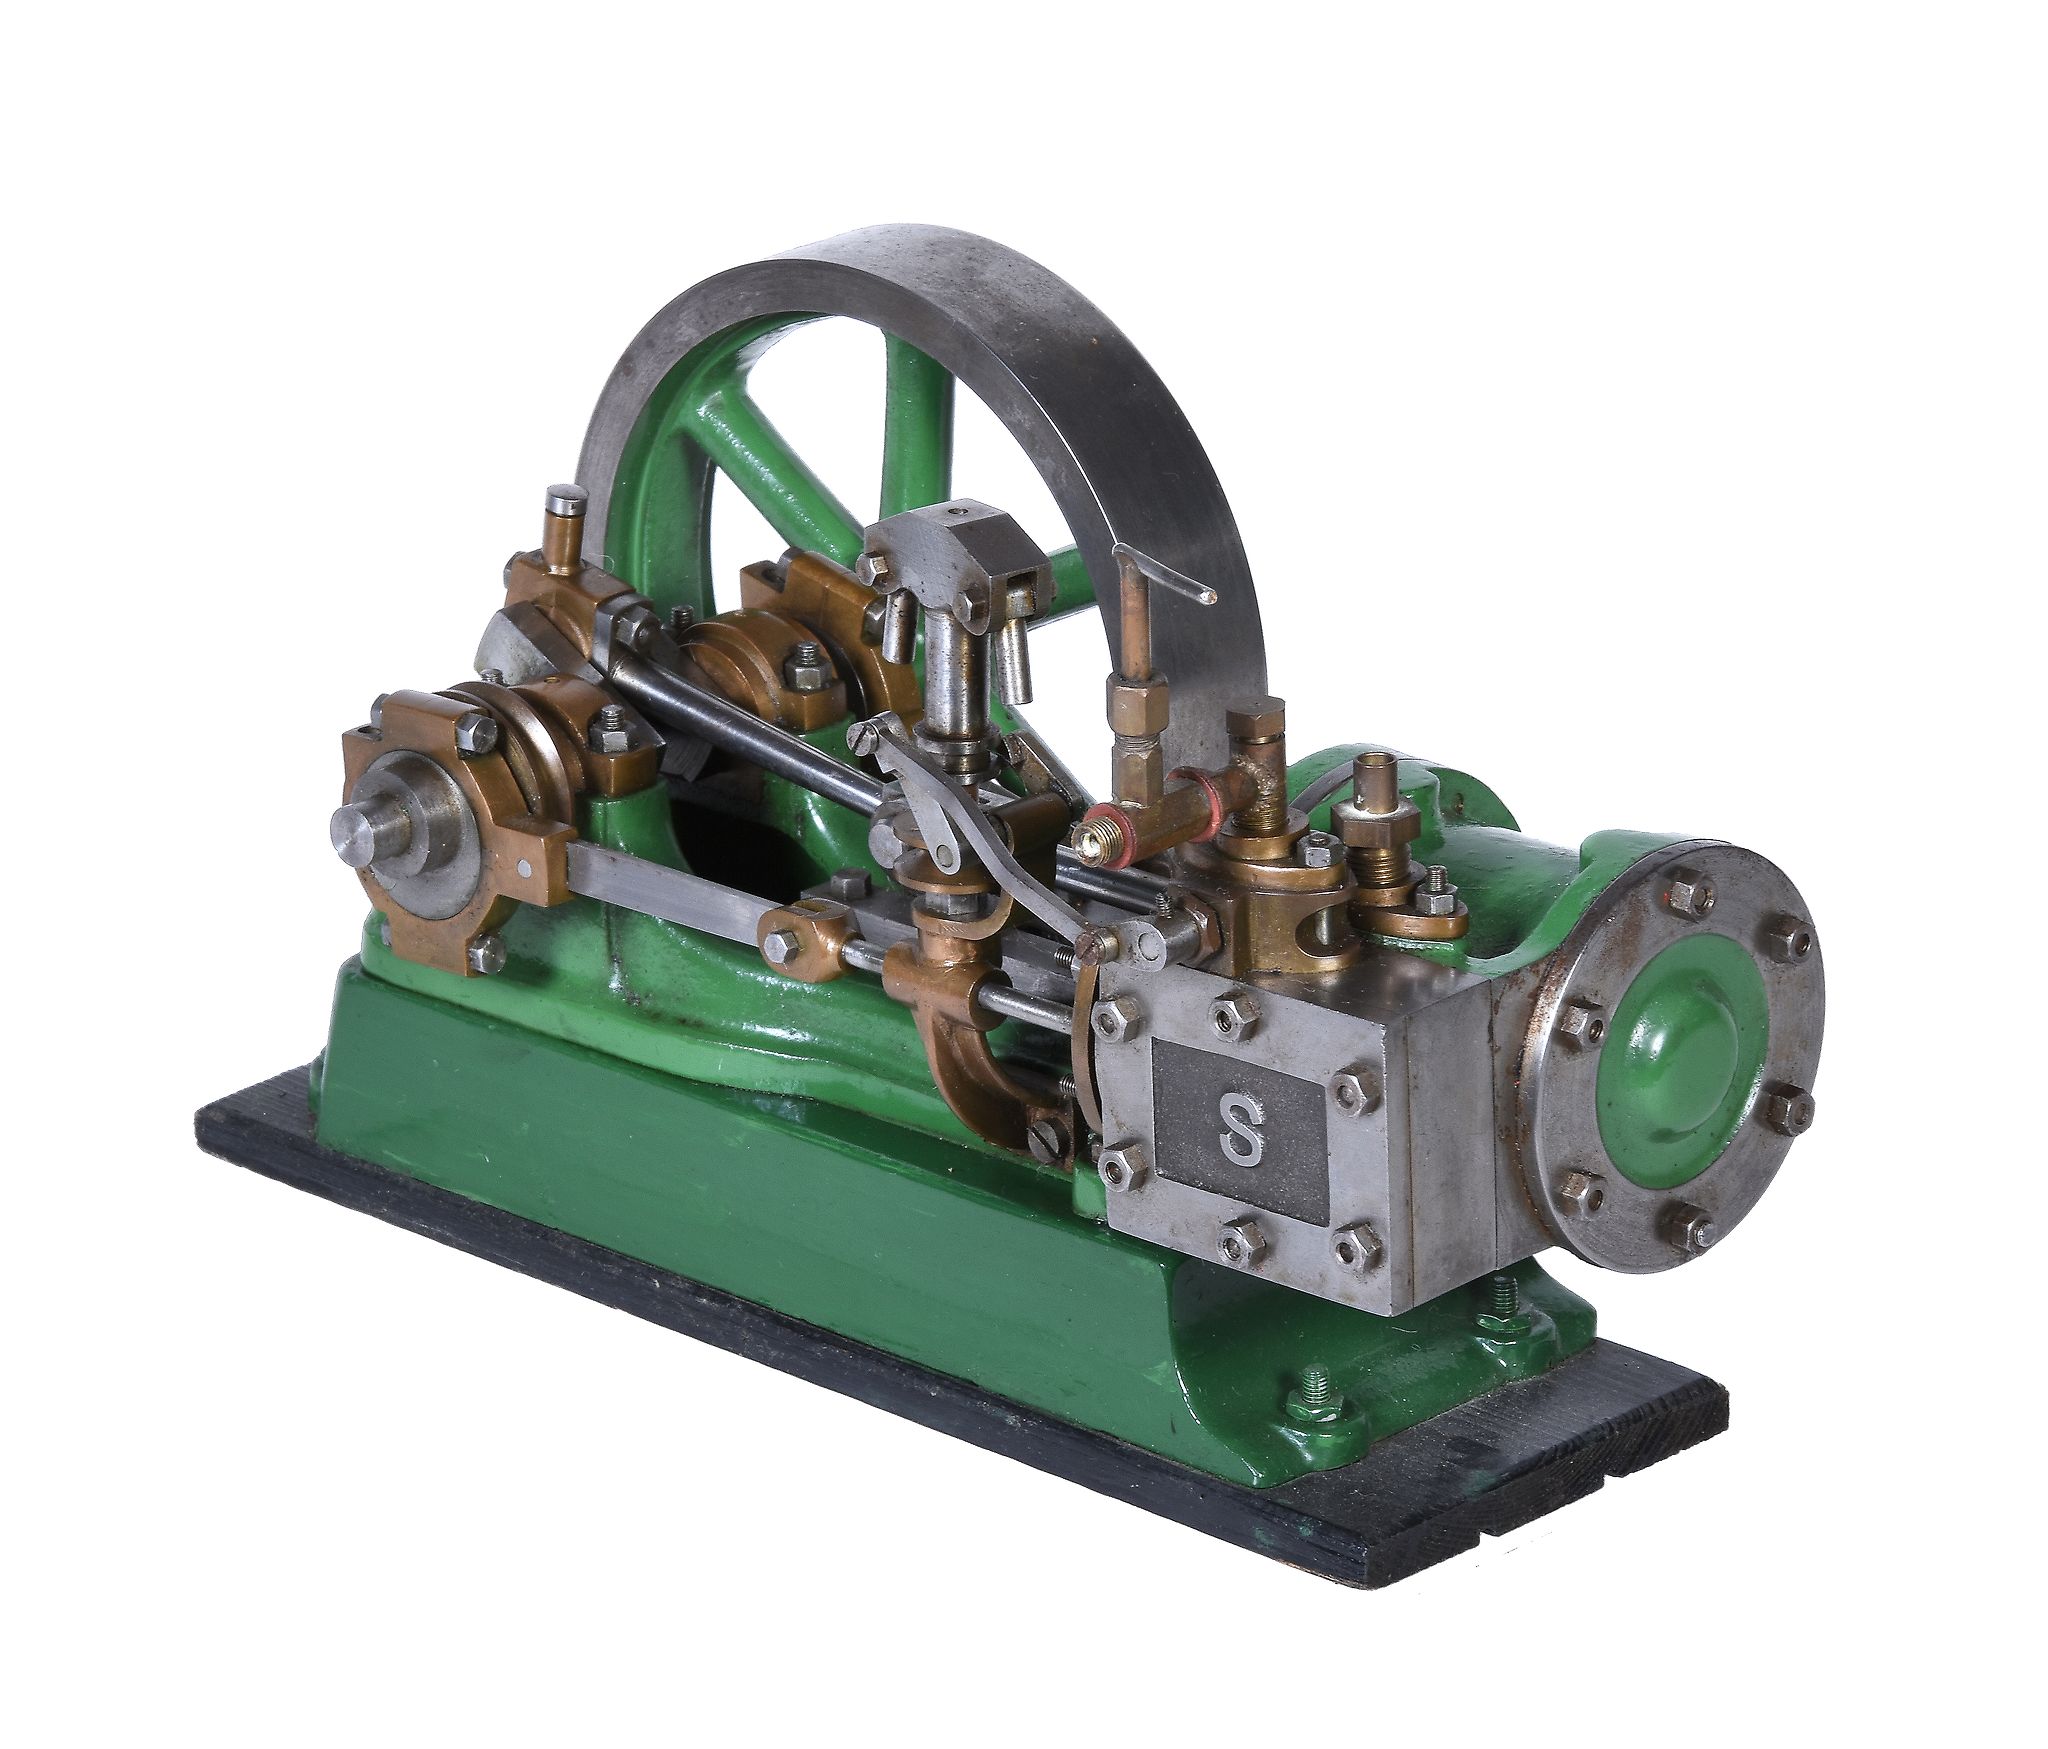 A well engineered model of a Stuart Turner No 9 horizontal mill engine, the single cylinder 1 1/2